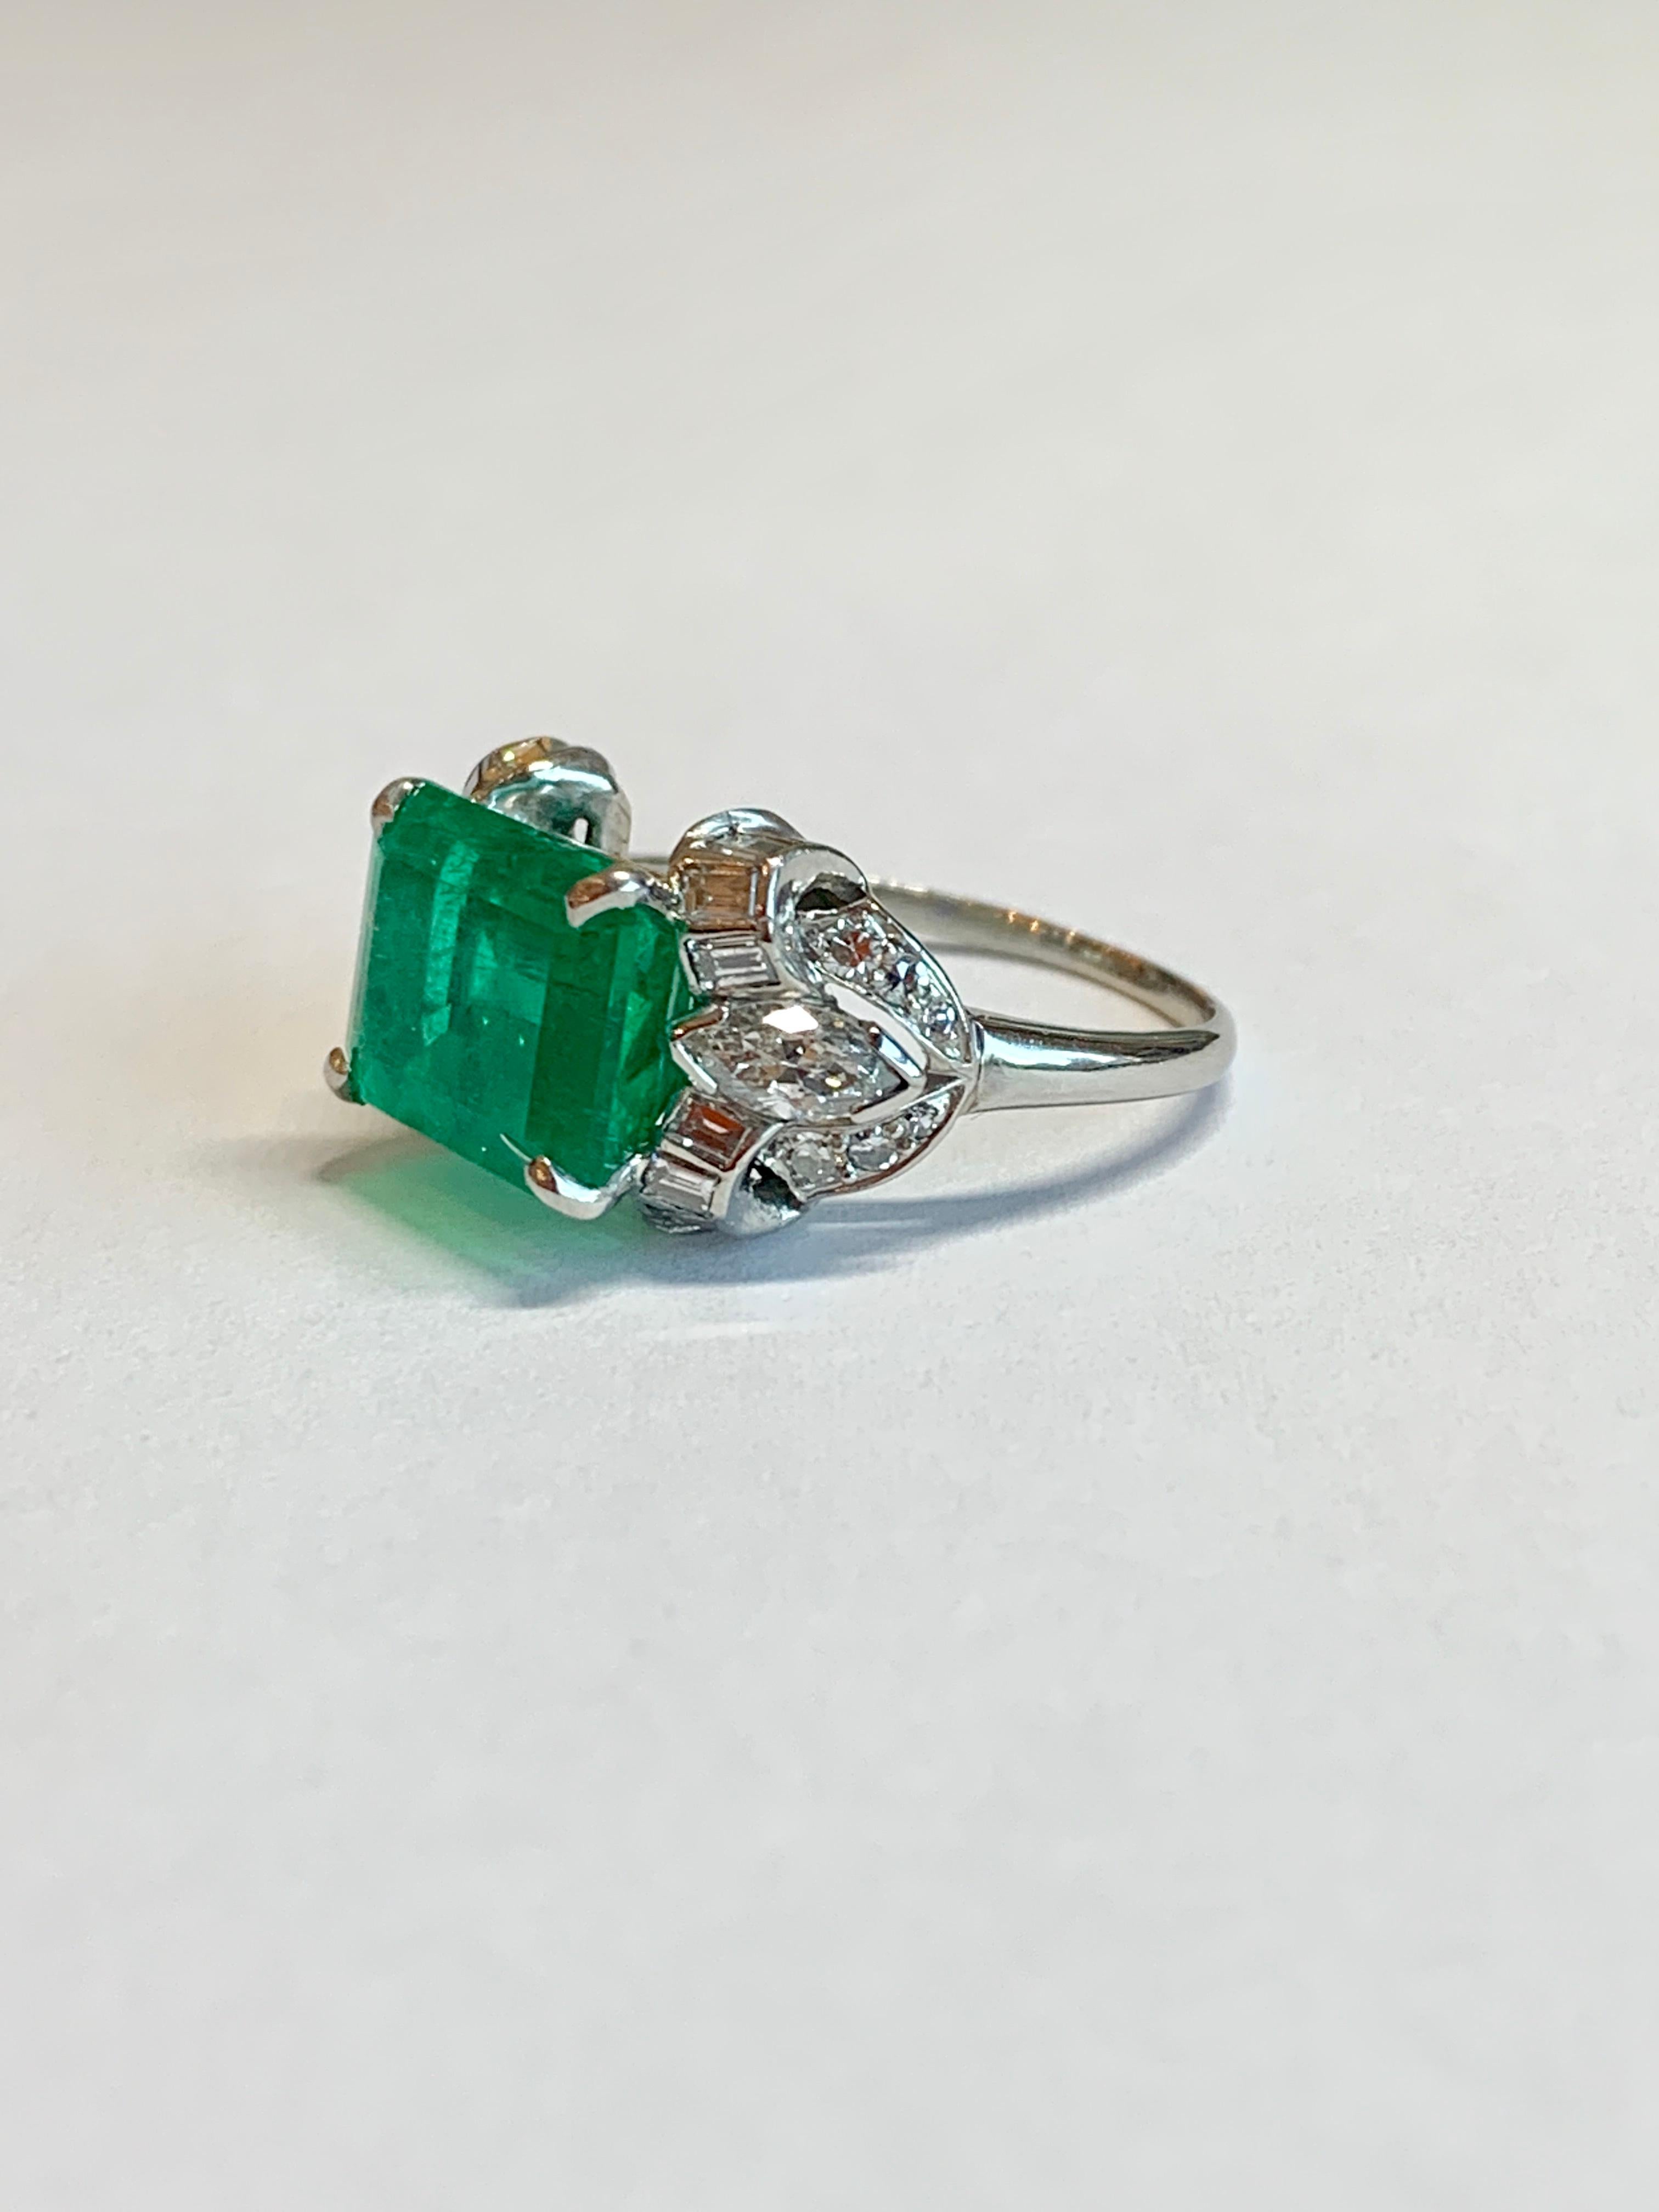 This dazzling Late Art Deco ring circa 1935 highlights an east-west set emerald weighing exactly 4.97 carats with an accompanying GIA certificate #2183240642 stating the stone is a natural emerald with Colombian origin. The platinum mounting is